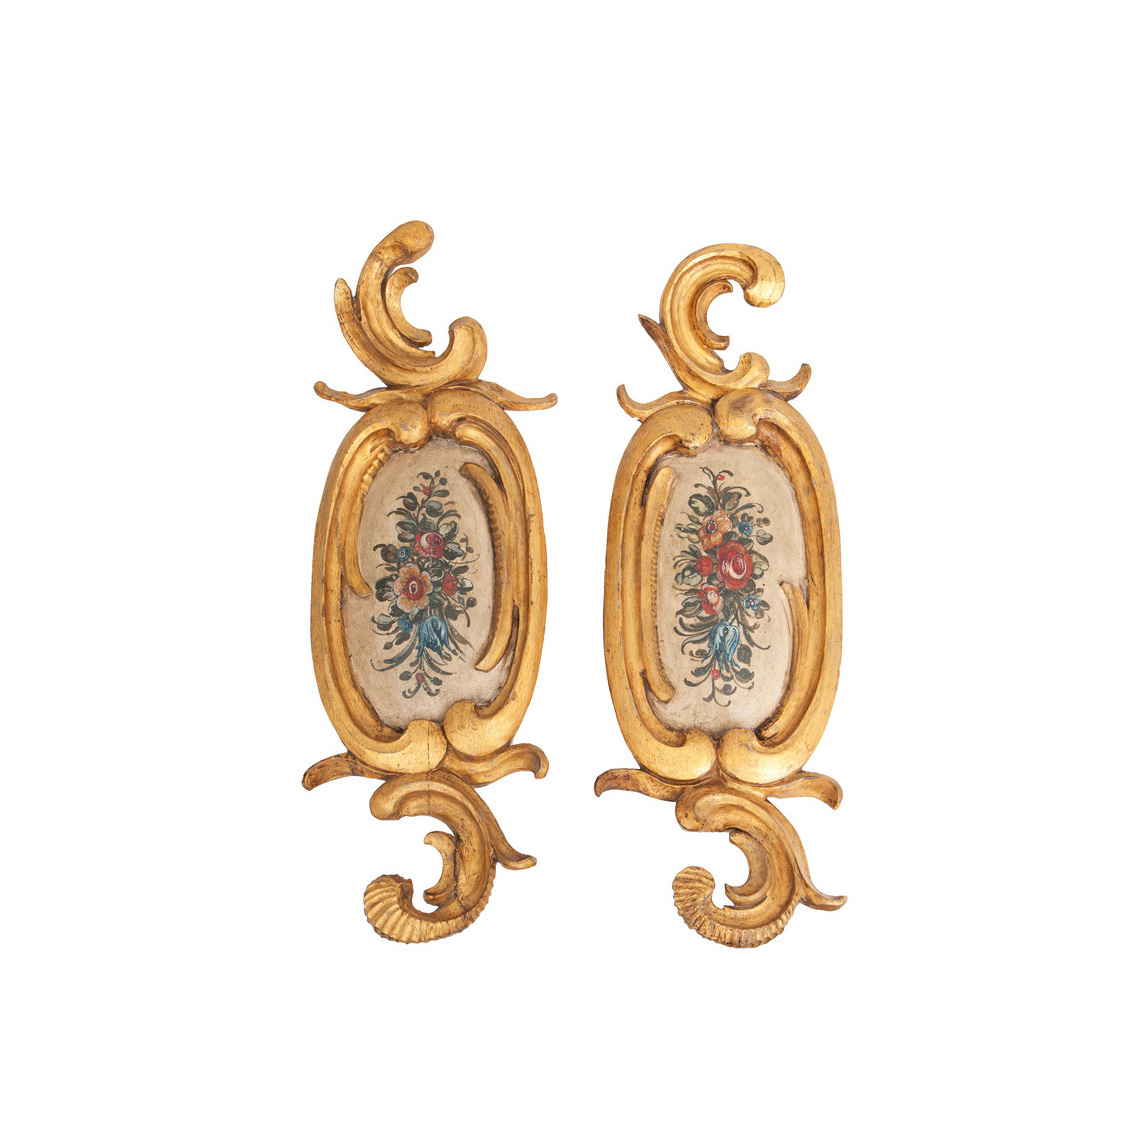 A pair of floral wall decorations with rocaille frame